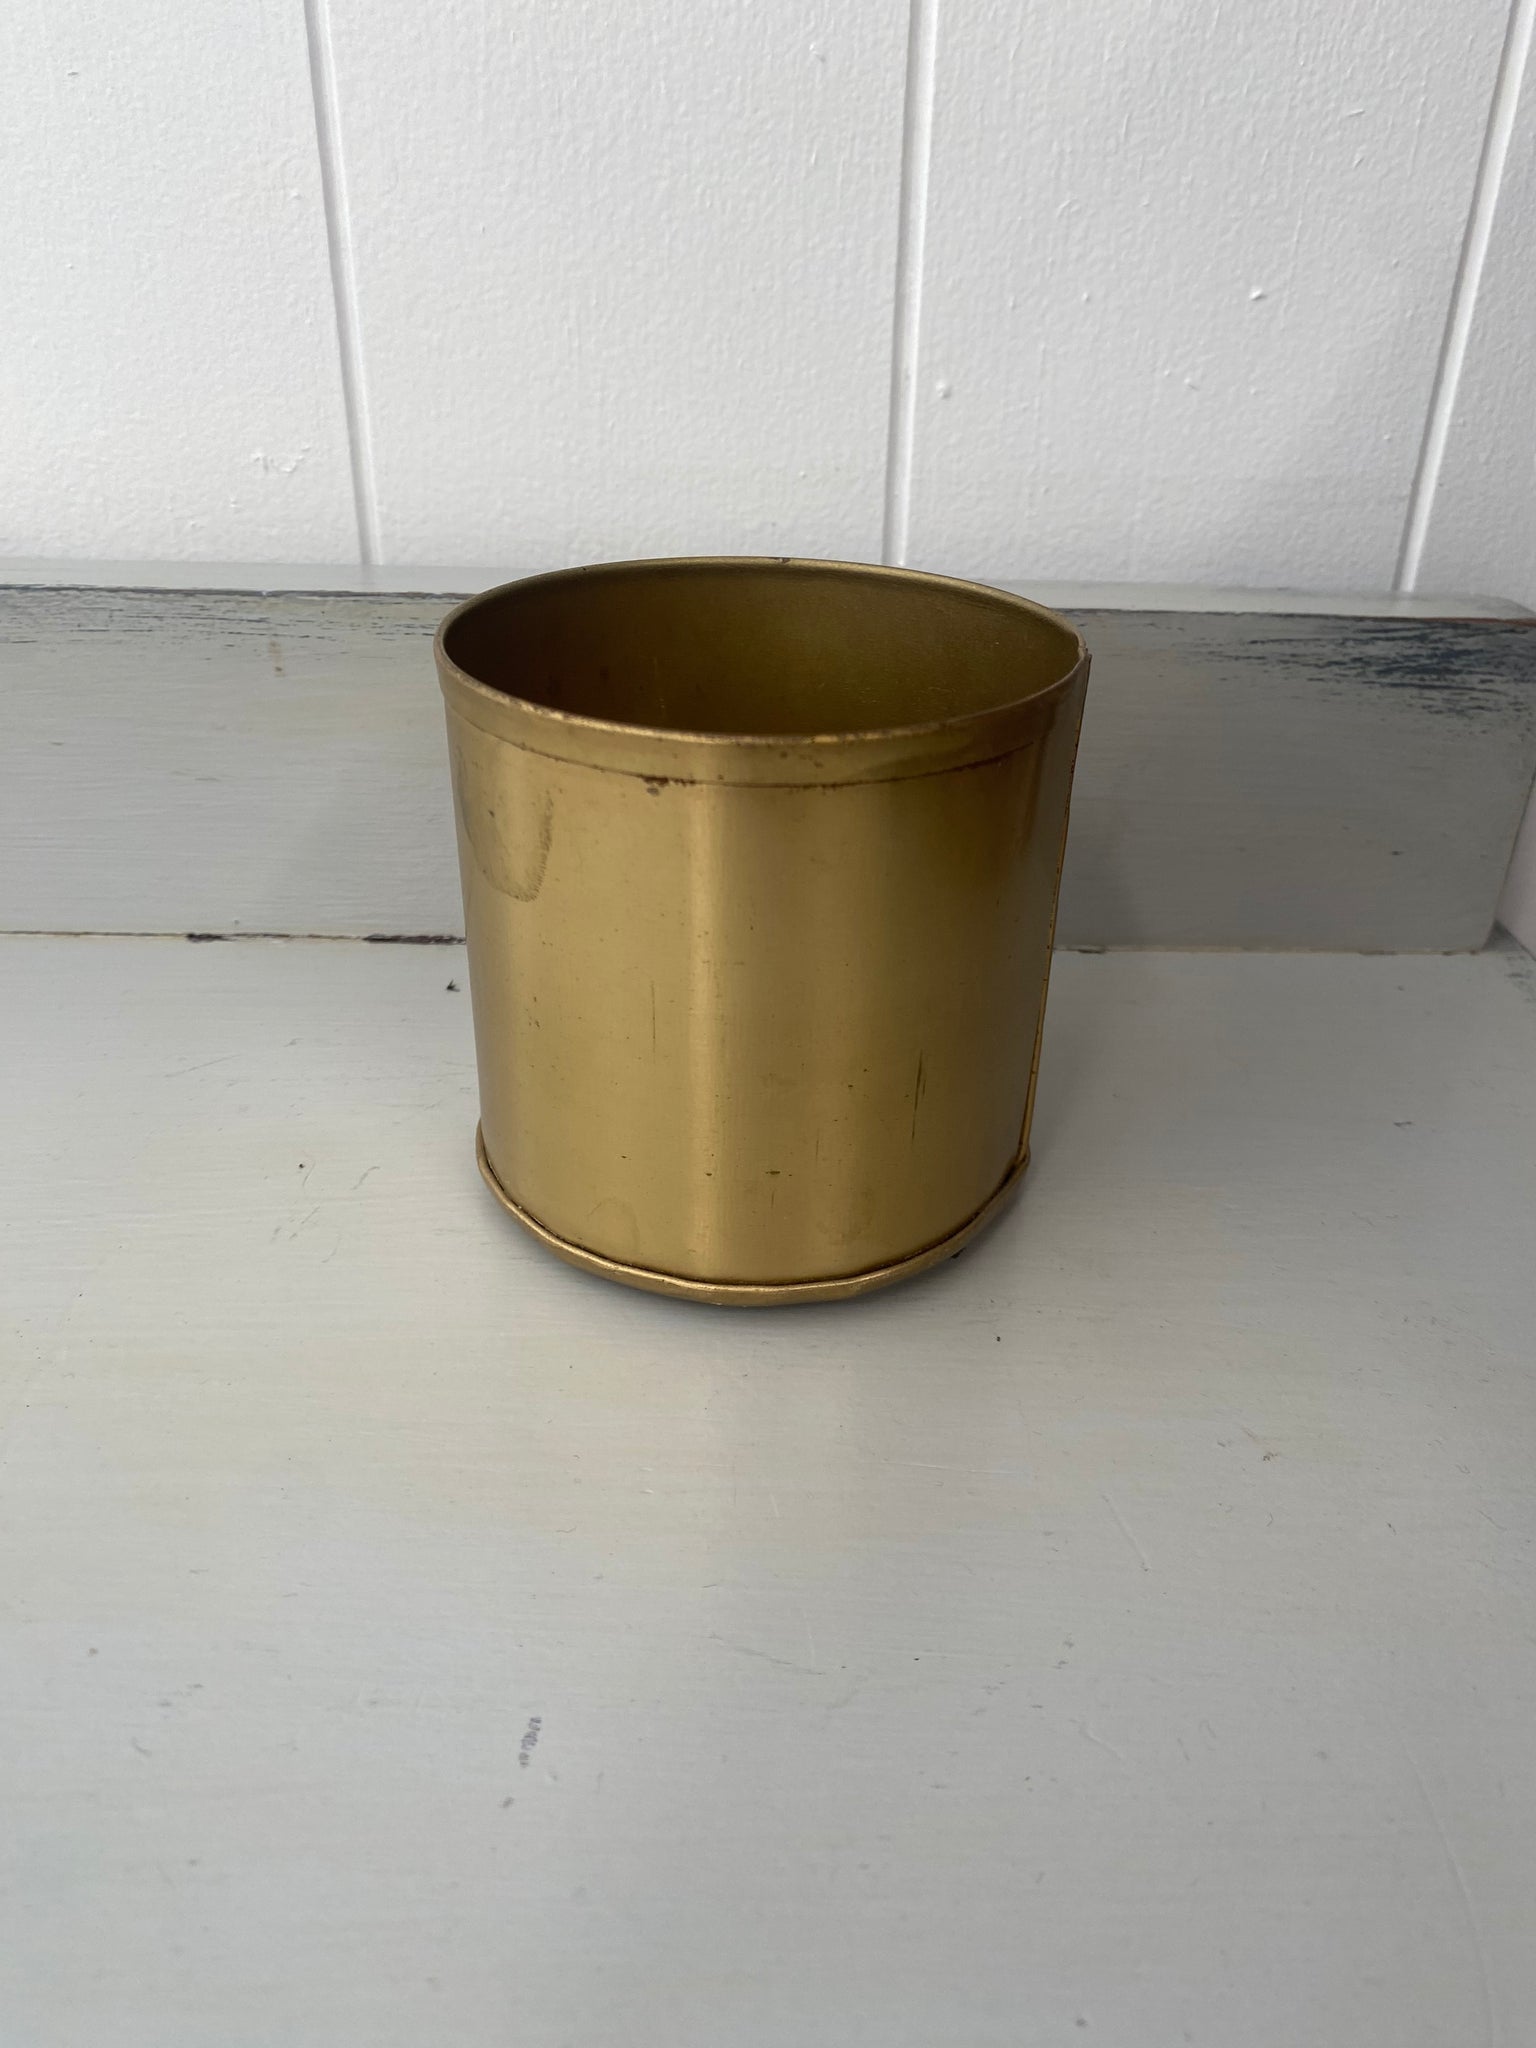 Brushed Brass Vase Extra Small - EX HIRE ITEMS